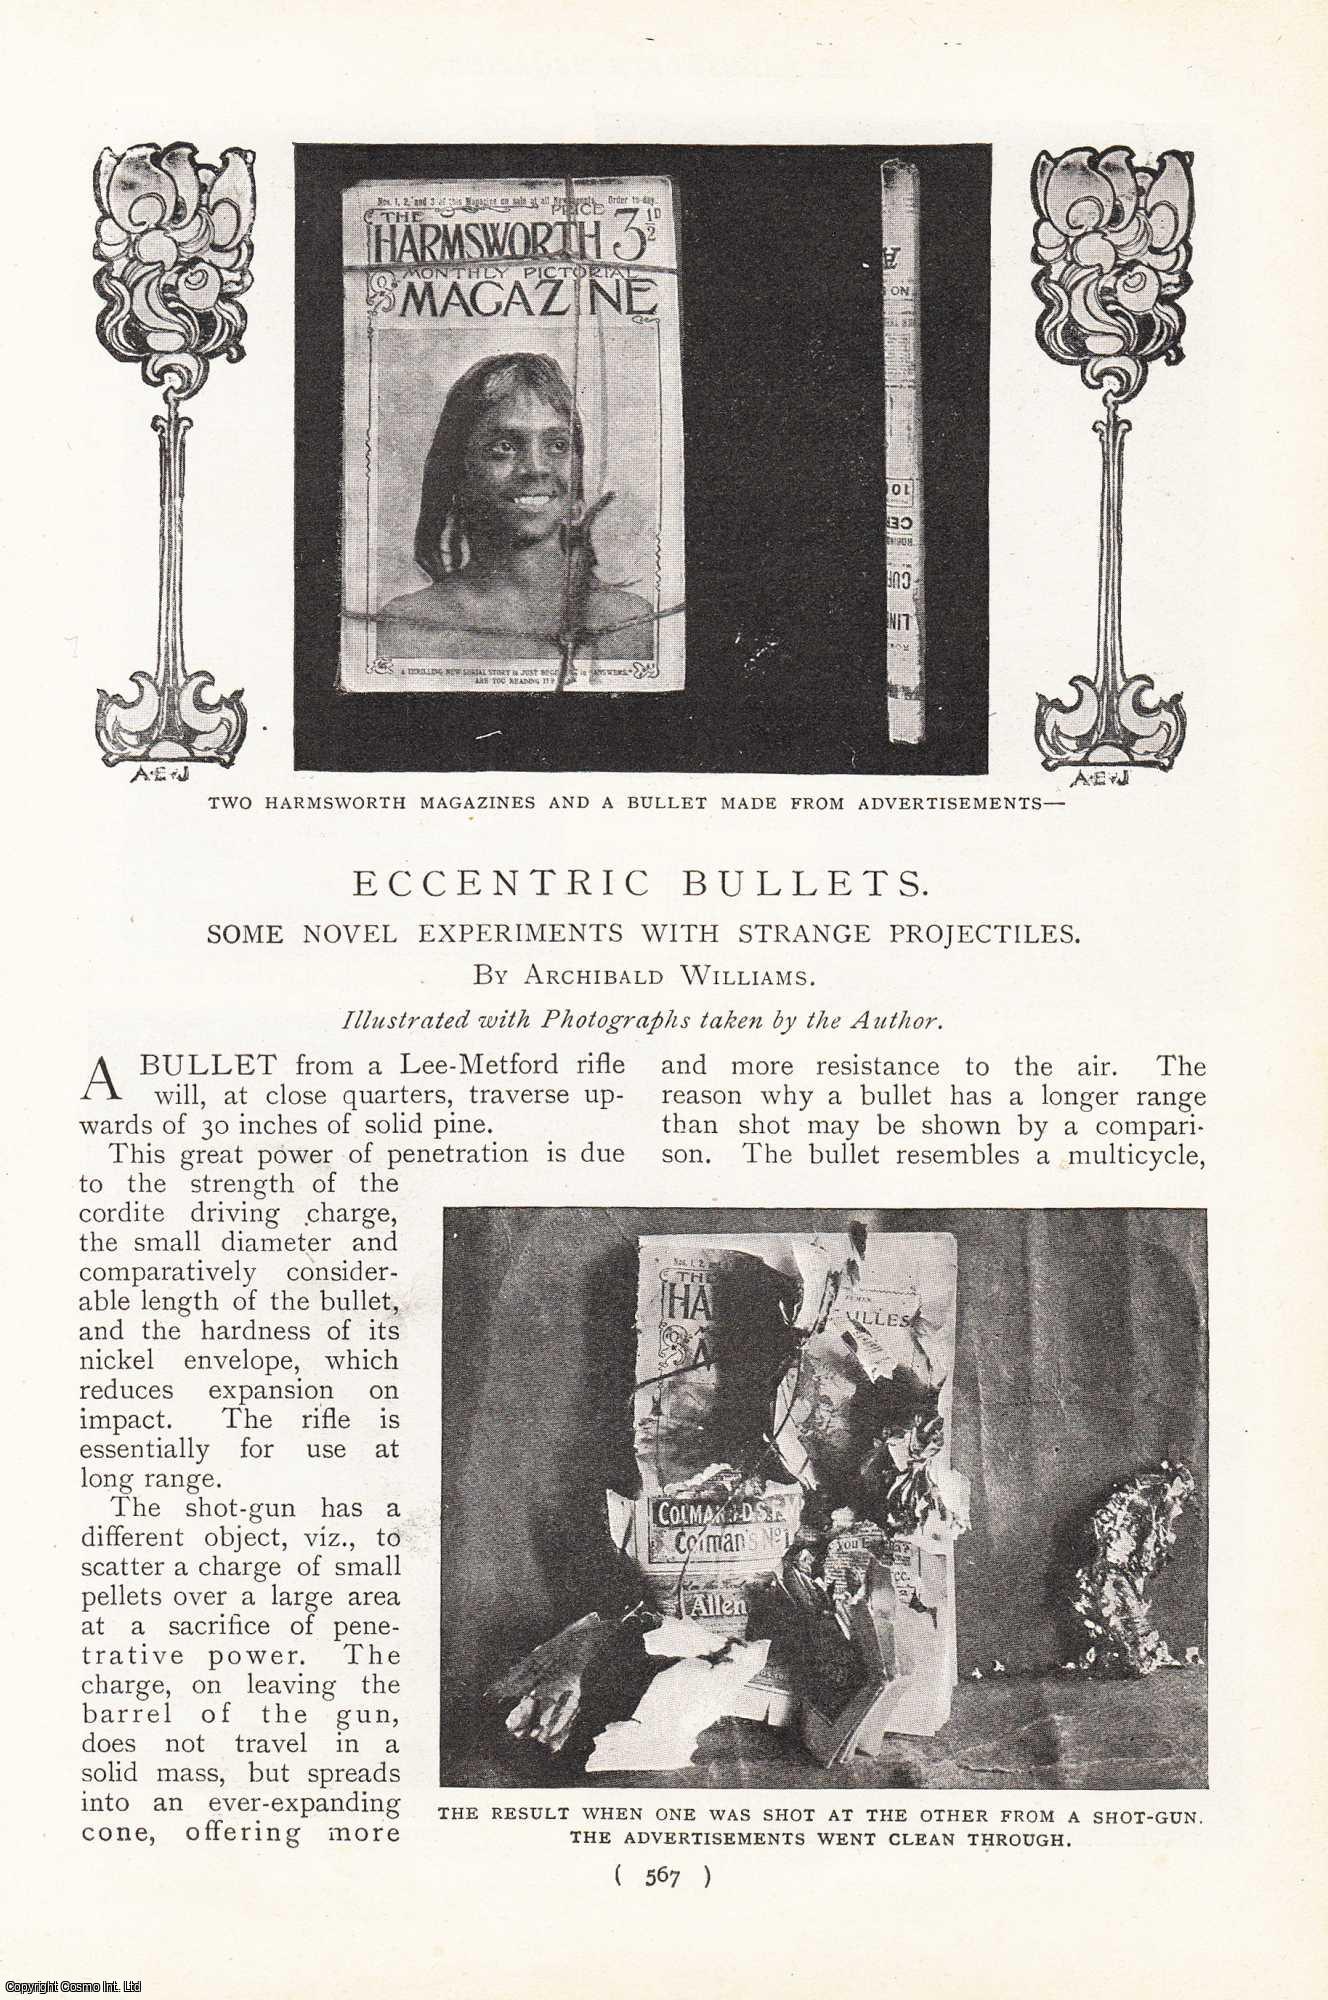 Archibald Williams - A Bullet From A Lee-Metford Rifle : Eccentric Bullets : Some Novel Experiments With Strange Projectiles. An uncommon original article from the Harmsworth London Magazine, 1901.